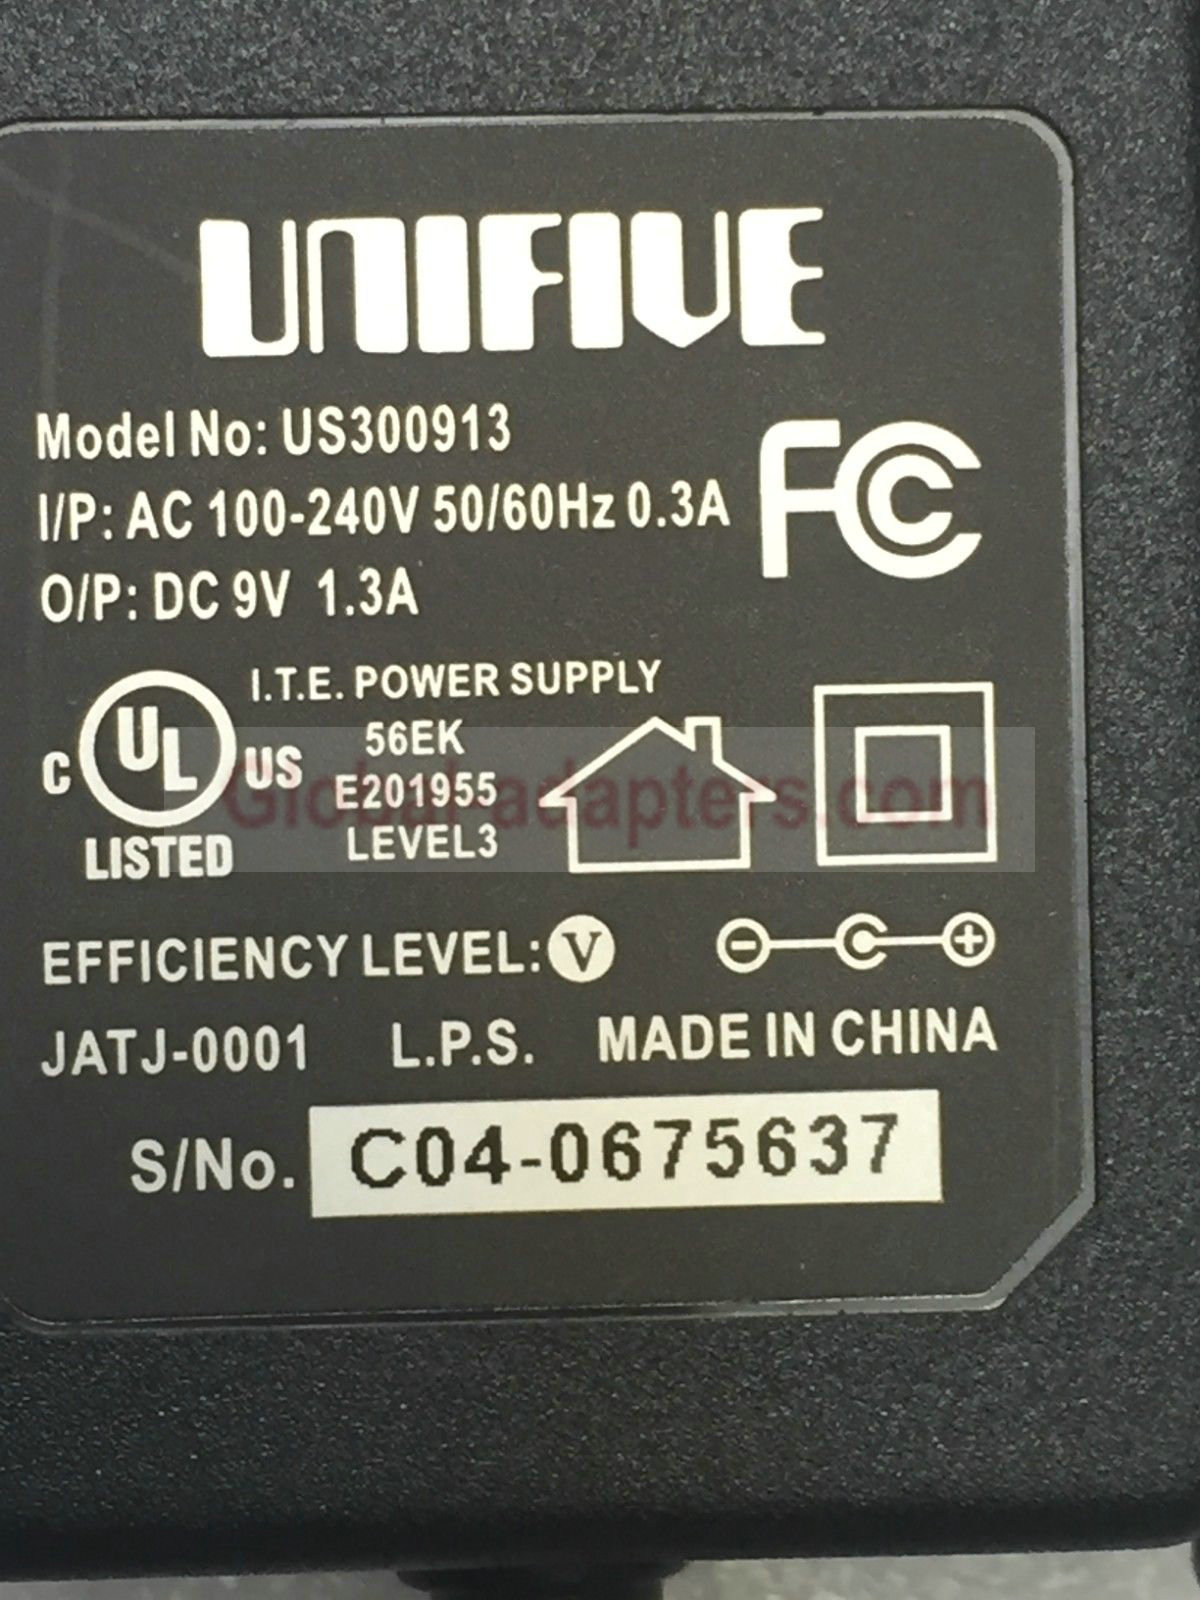 NEW 9V 1.3A ac adaptor for Unifive US300913 power supply - Click Image to Close